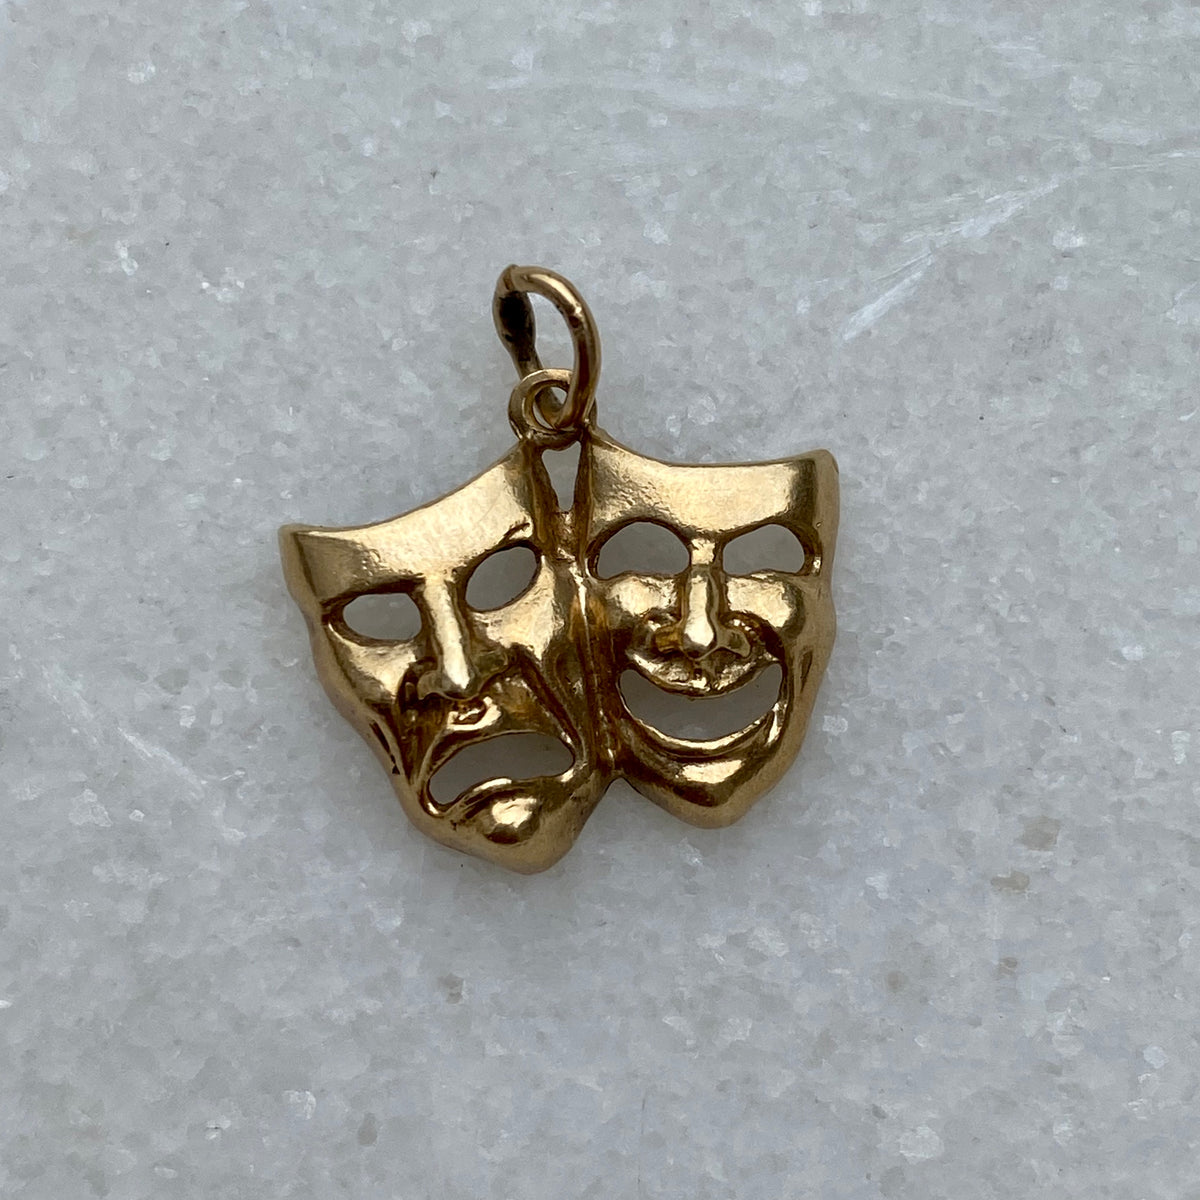 Vintage Comedy & Tragedy Mask Charm Pendant sold by Doyle & Doyle an antique and vintage jewelry boutique.